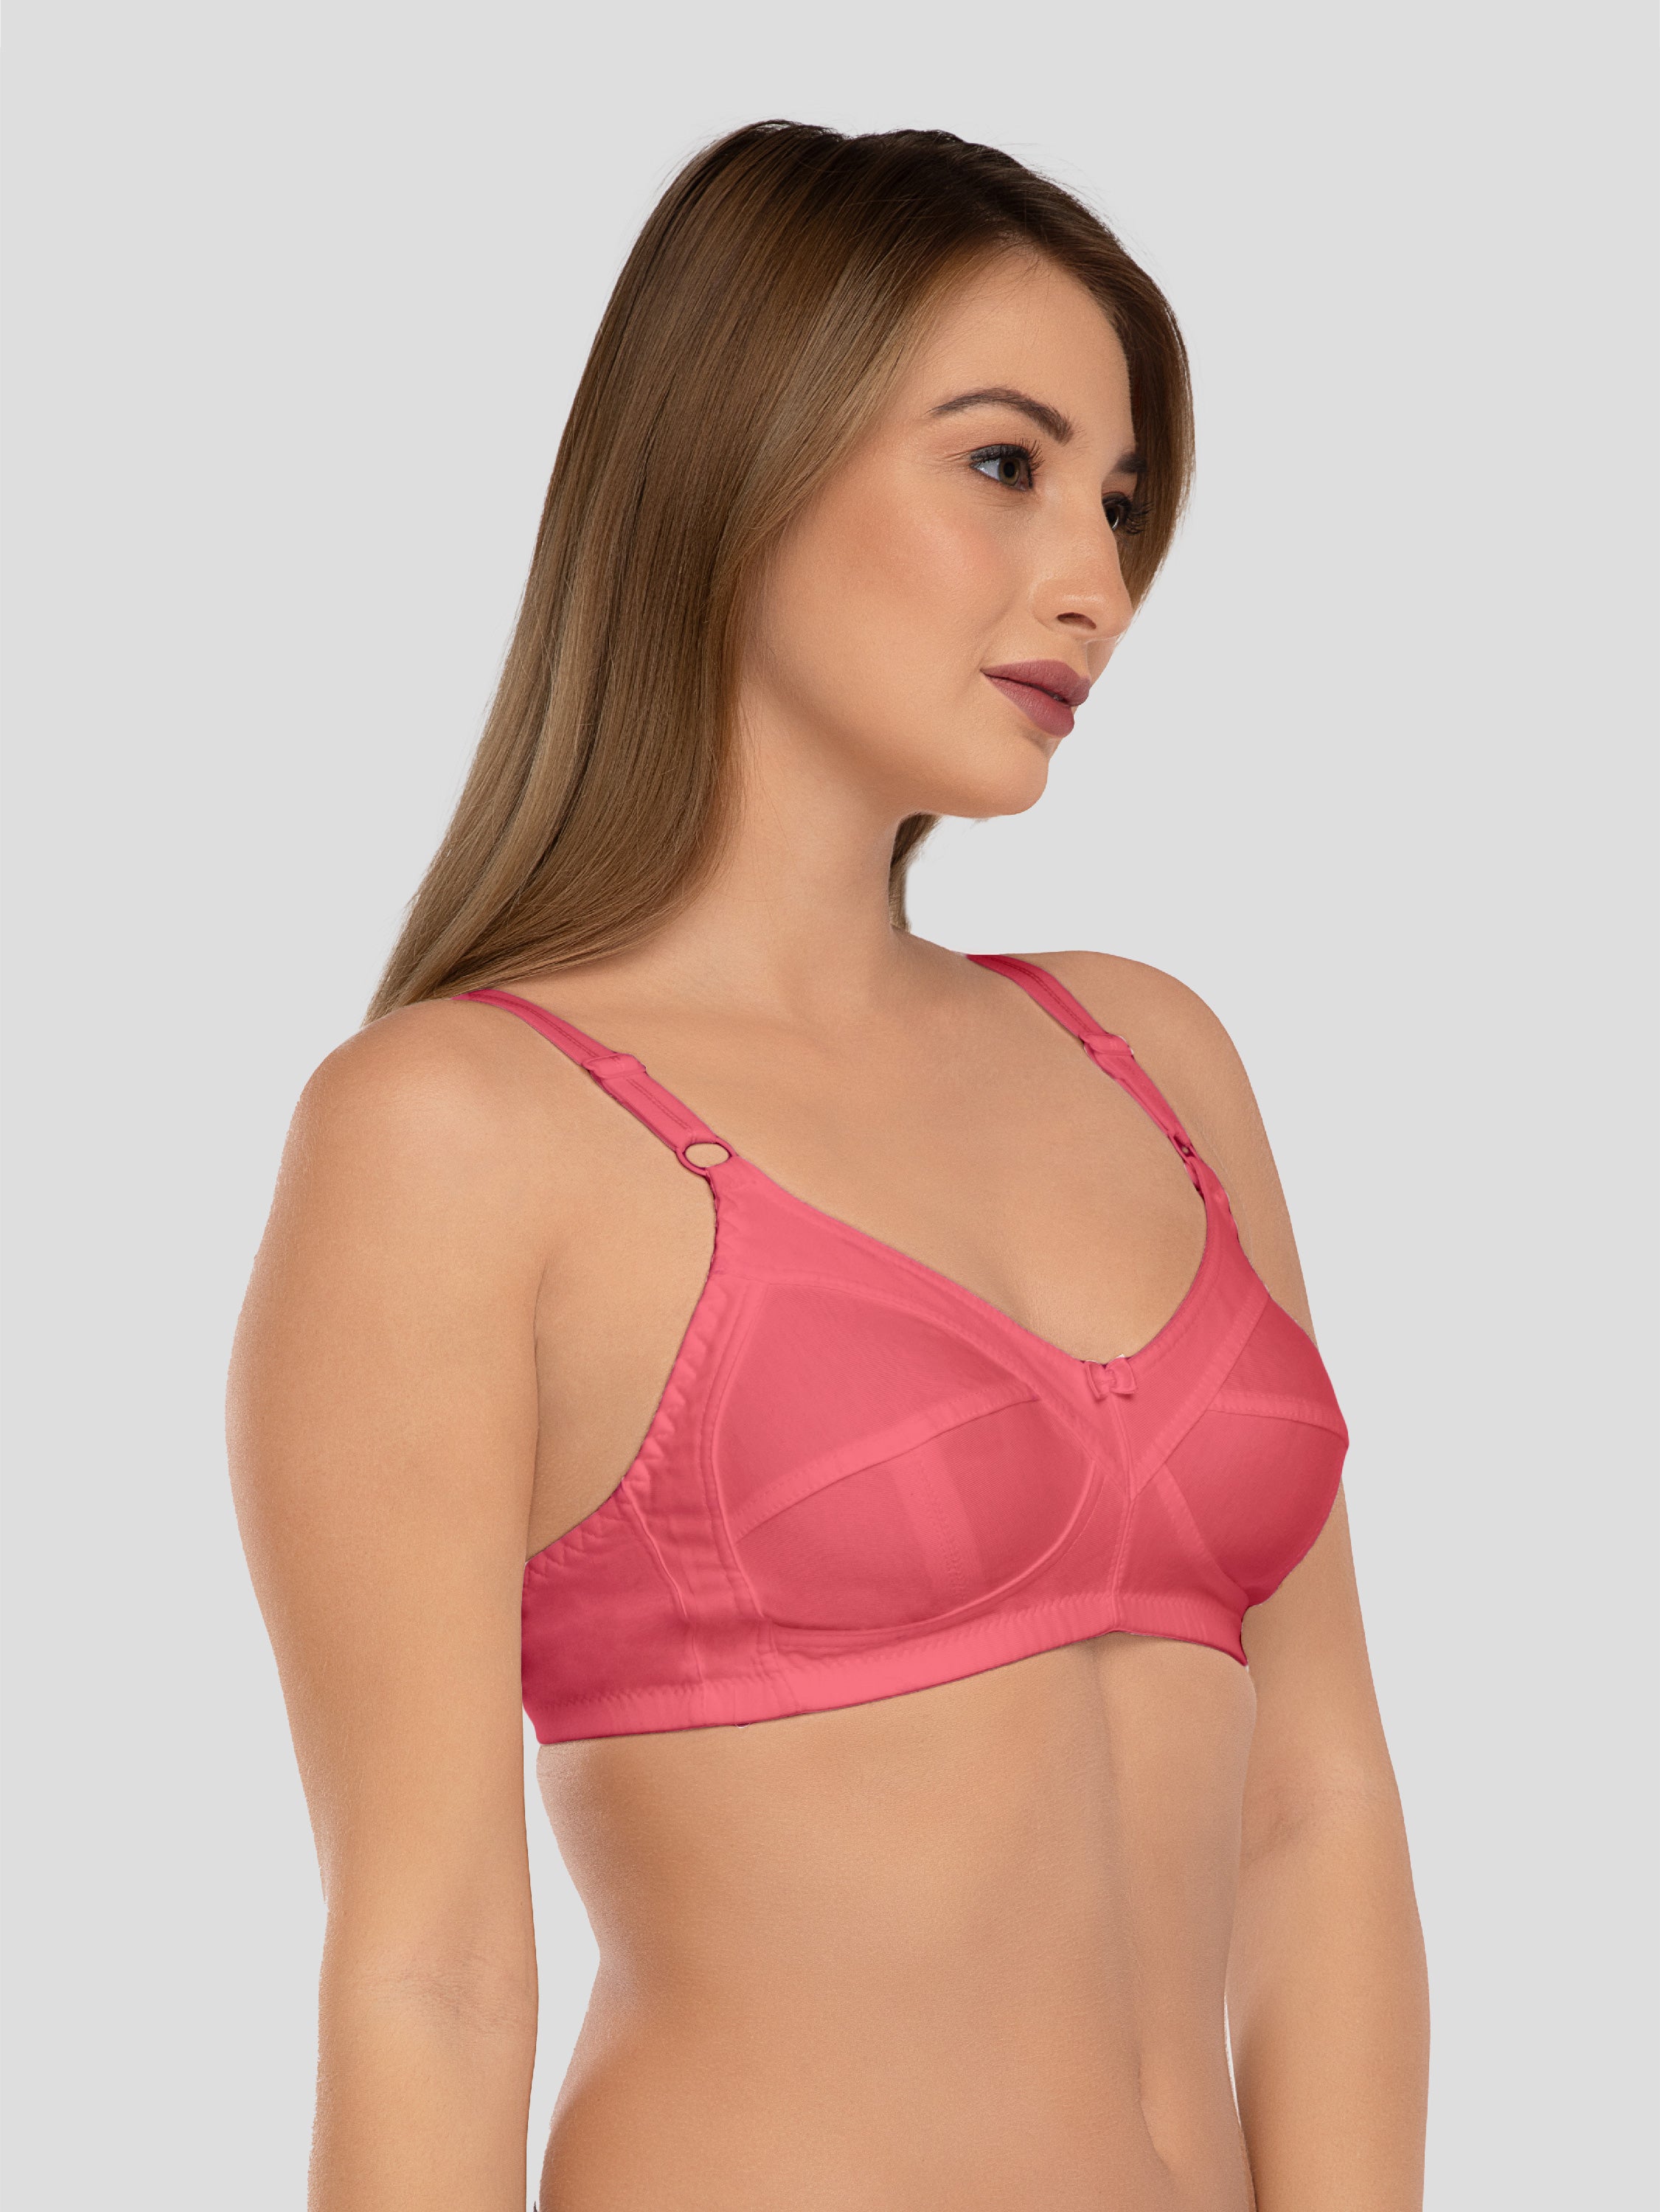 Daisy Dee Carrot Non Padded Non Wired Full Coverage Bra NSHPU-Carrot